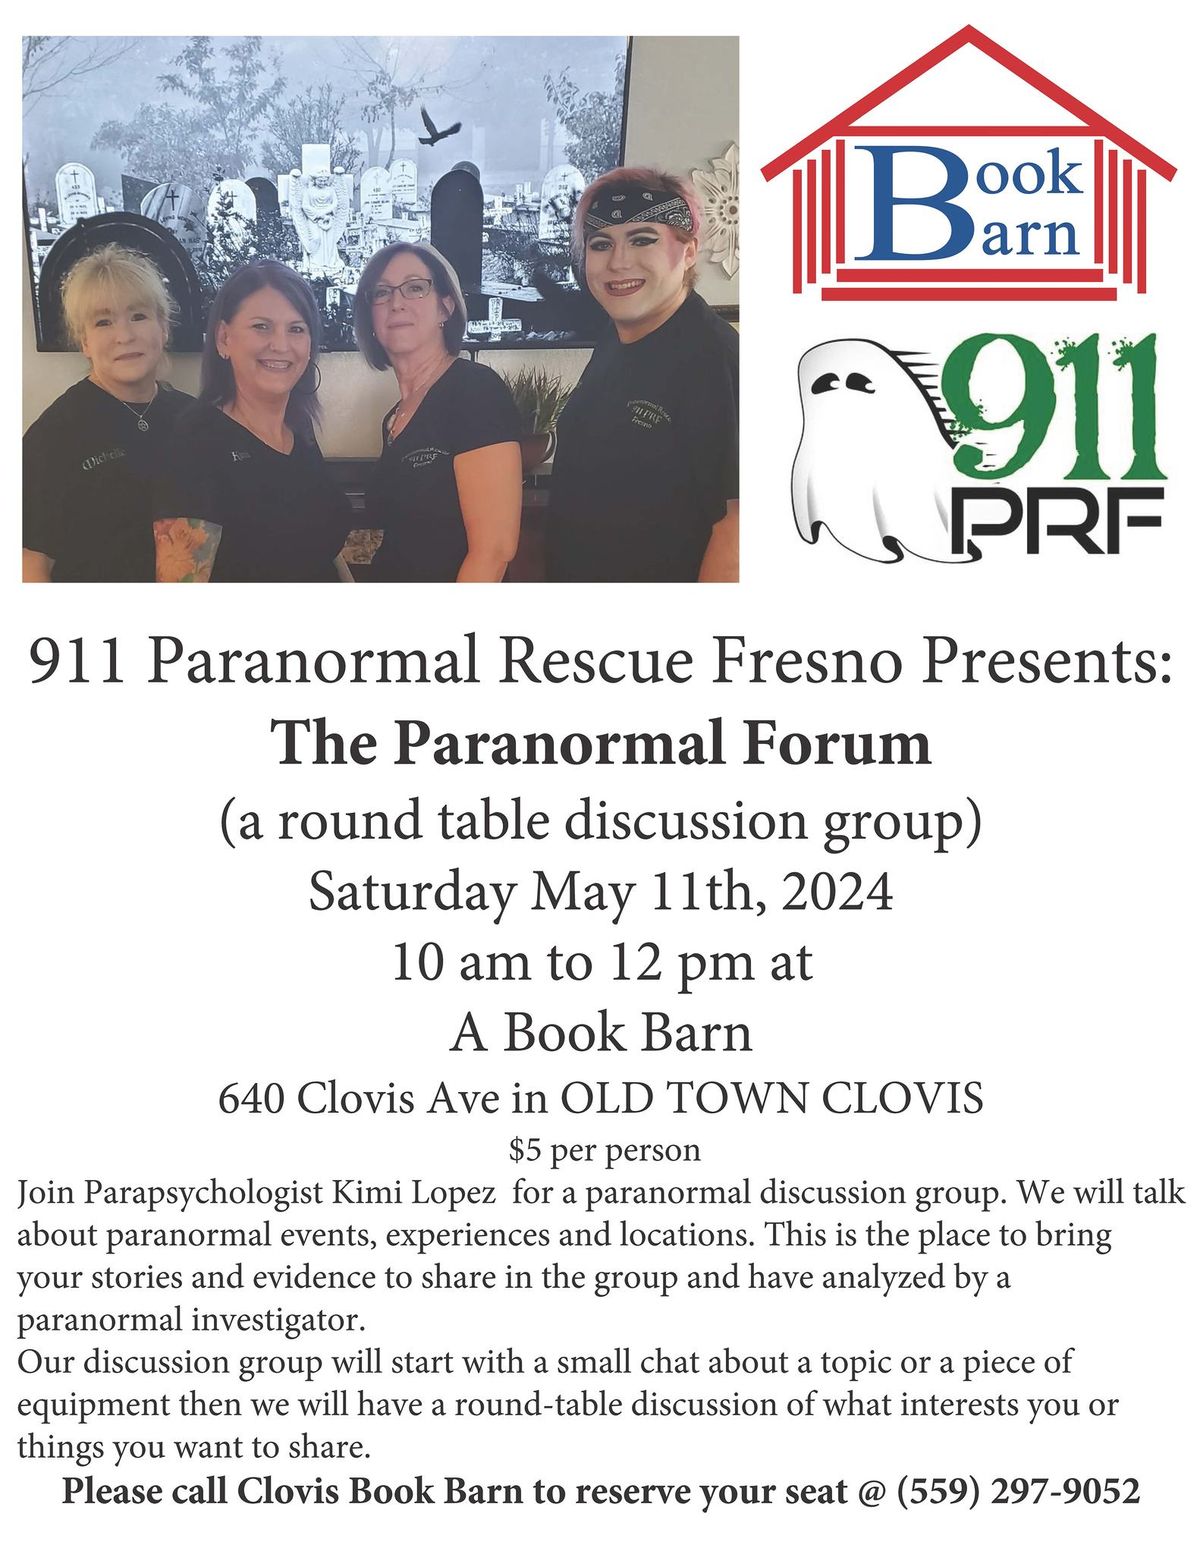 911 PRF presents The Paranormal Forum